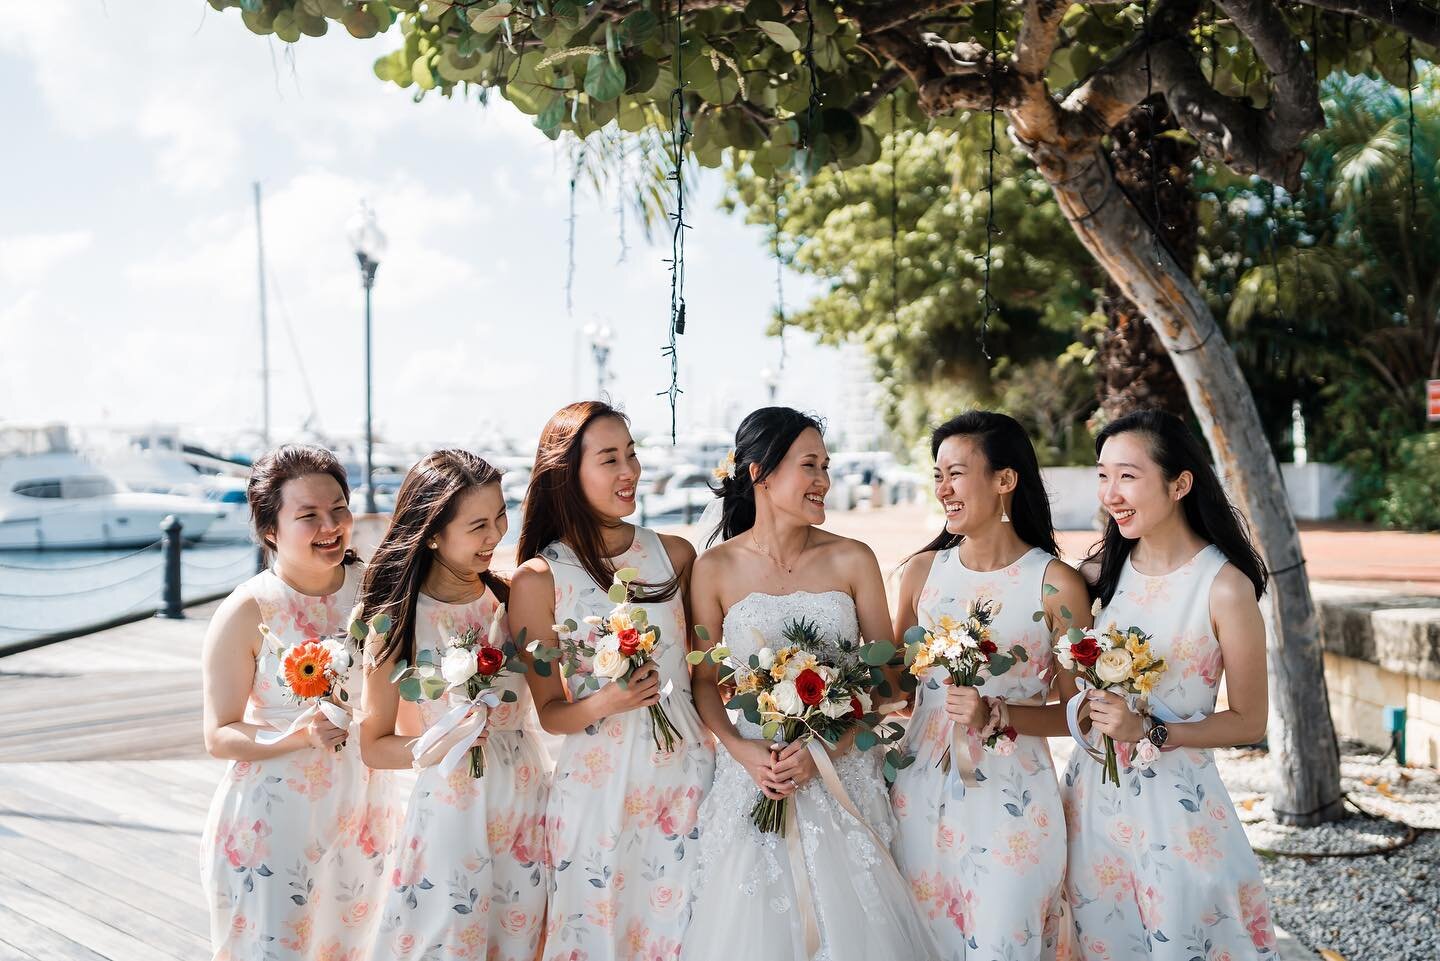 Wedding is a joyous event because you have your closest lovelies together by your side :)

📸: @ivanlimphoto